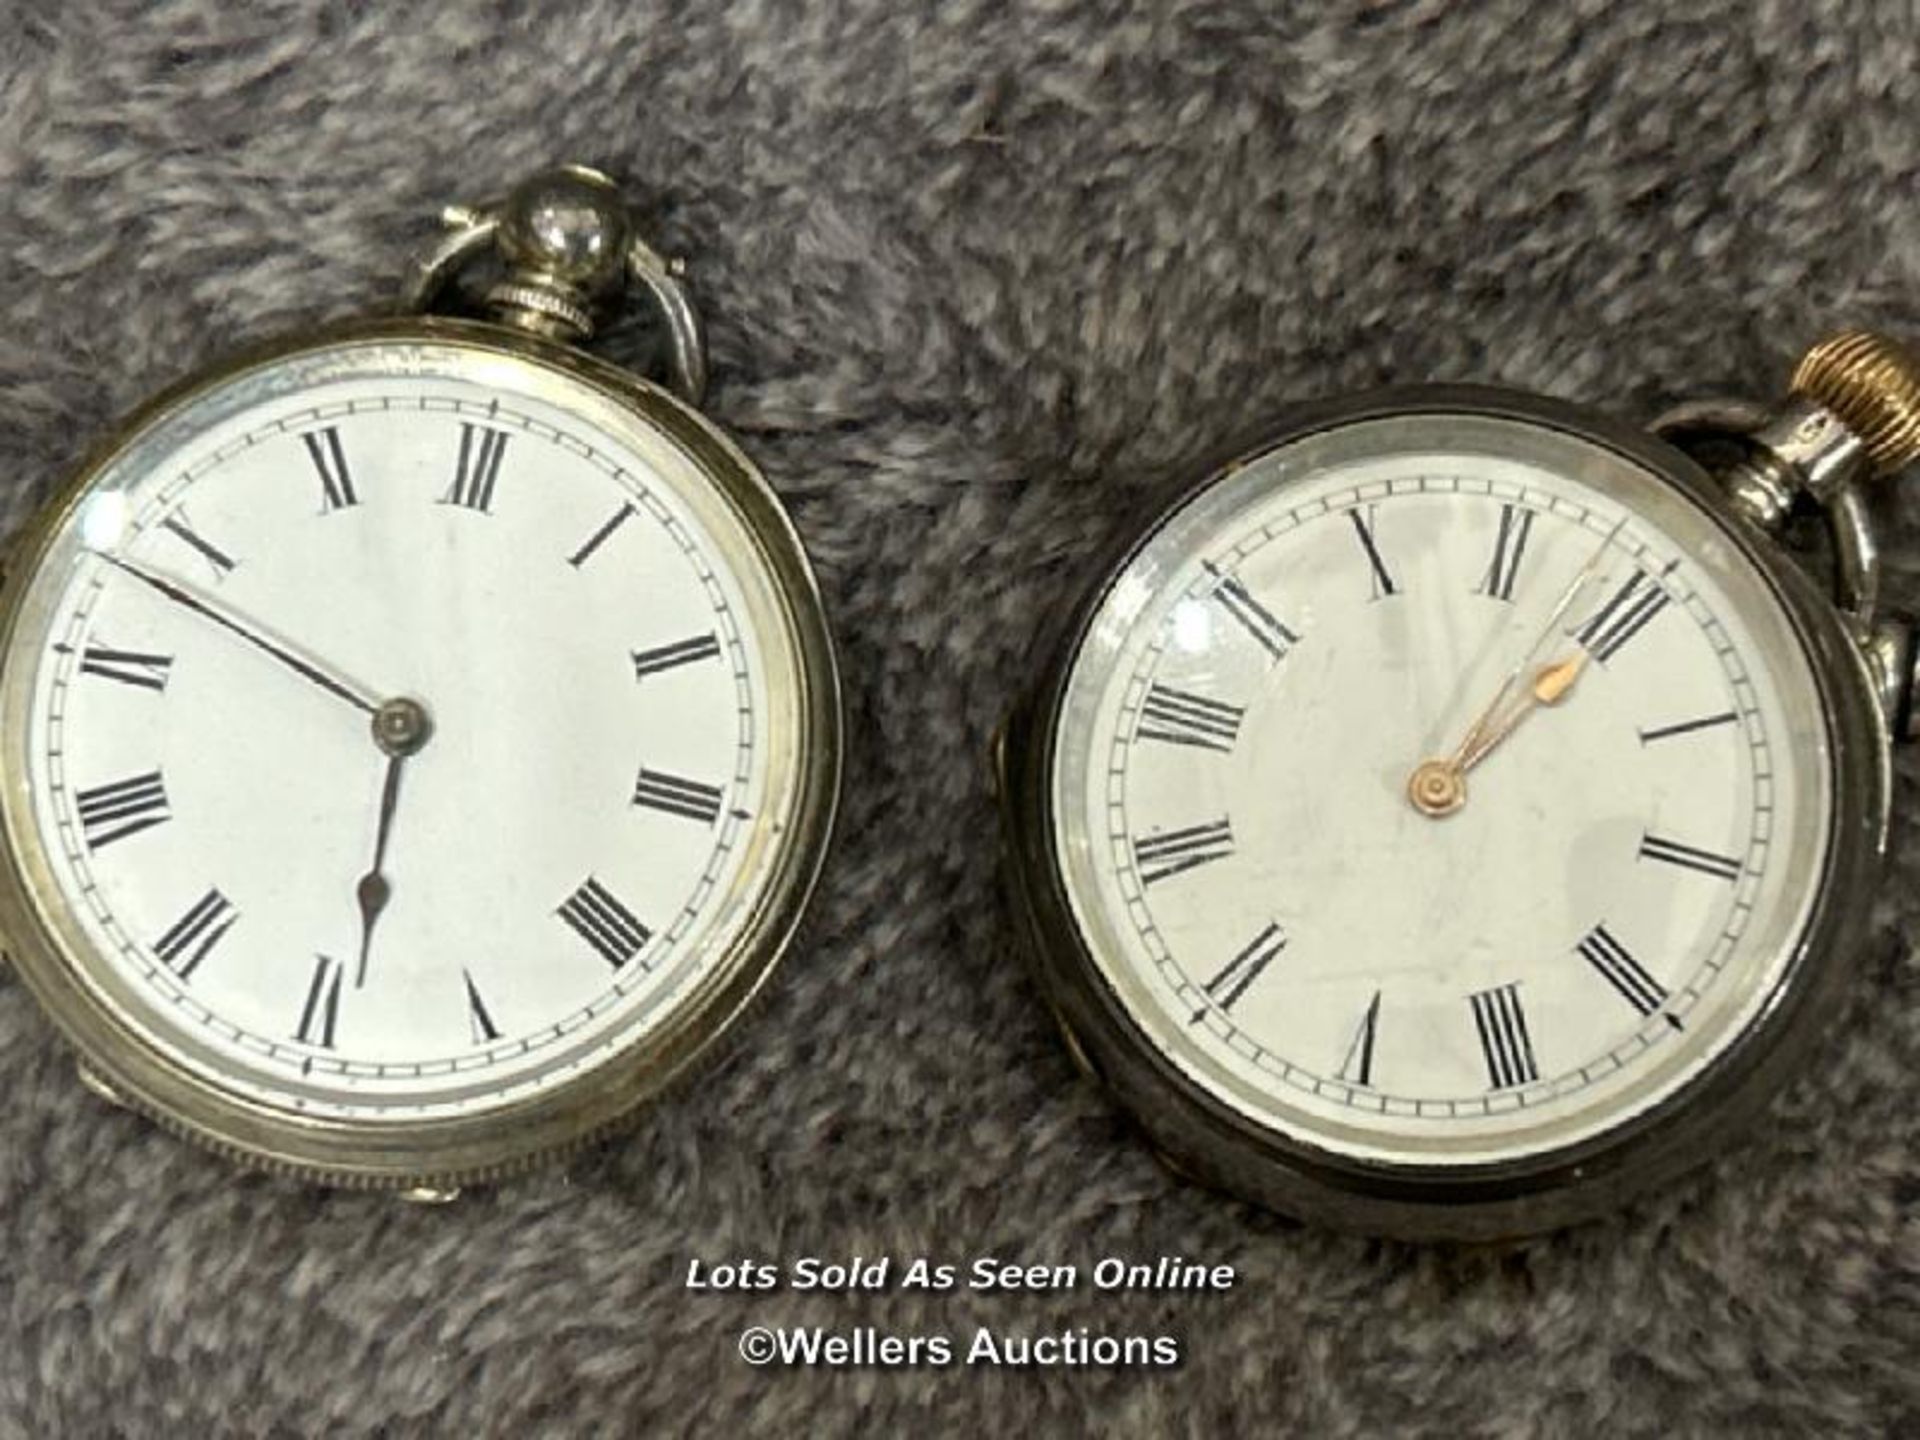 Three open face pocket watches, two with watch chains, a pendant watch on chain, a silver napkin - Image 12 of 13